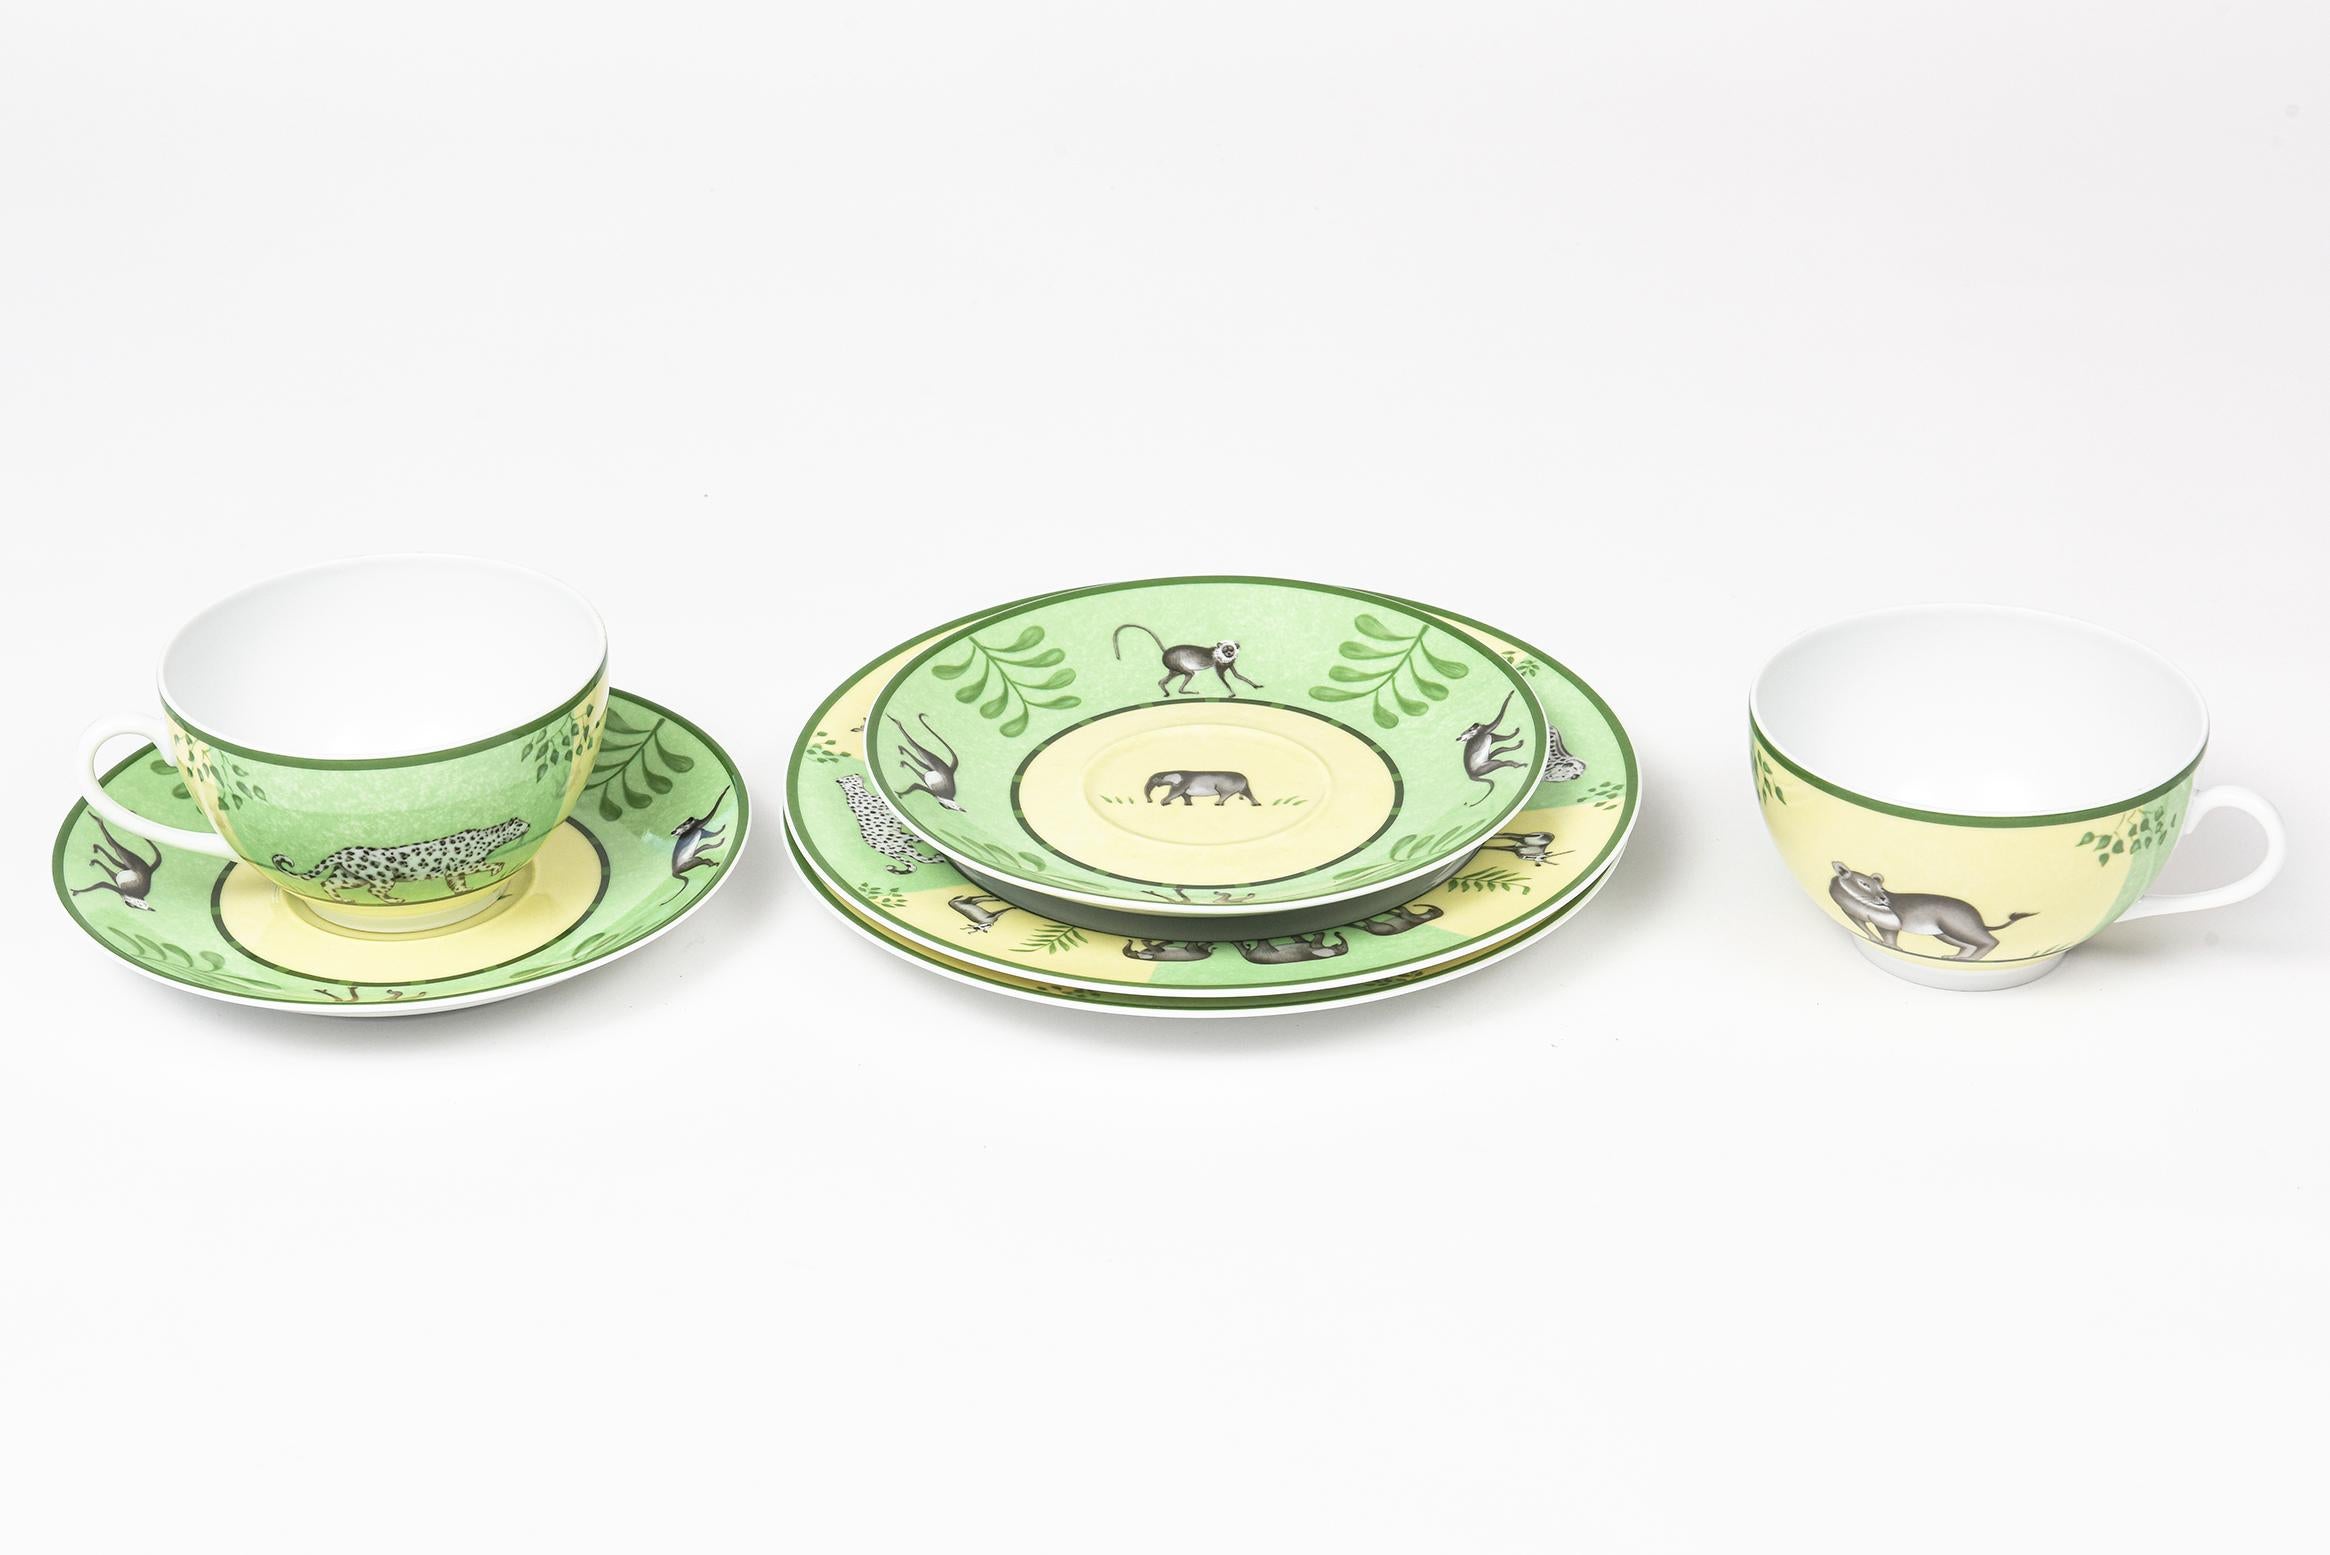 Africa Green Breakfast set by Hermes is green and yellow with a green border and jungle animals. Made in France CIRCA: 1997-2014. The set includes a pair of breakfast cups (Lion & Lioness) and saucers (Elephant center and leaf & monkey border). Also